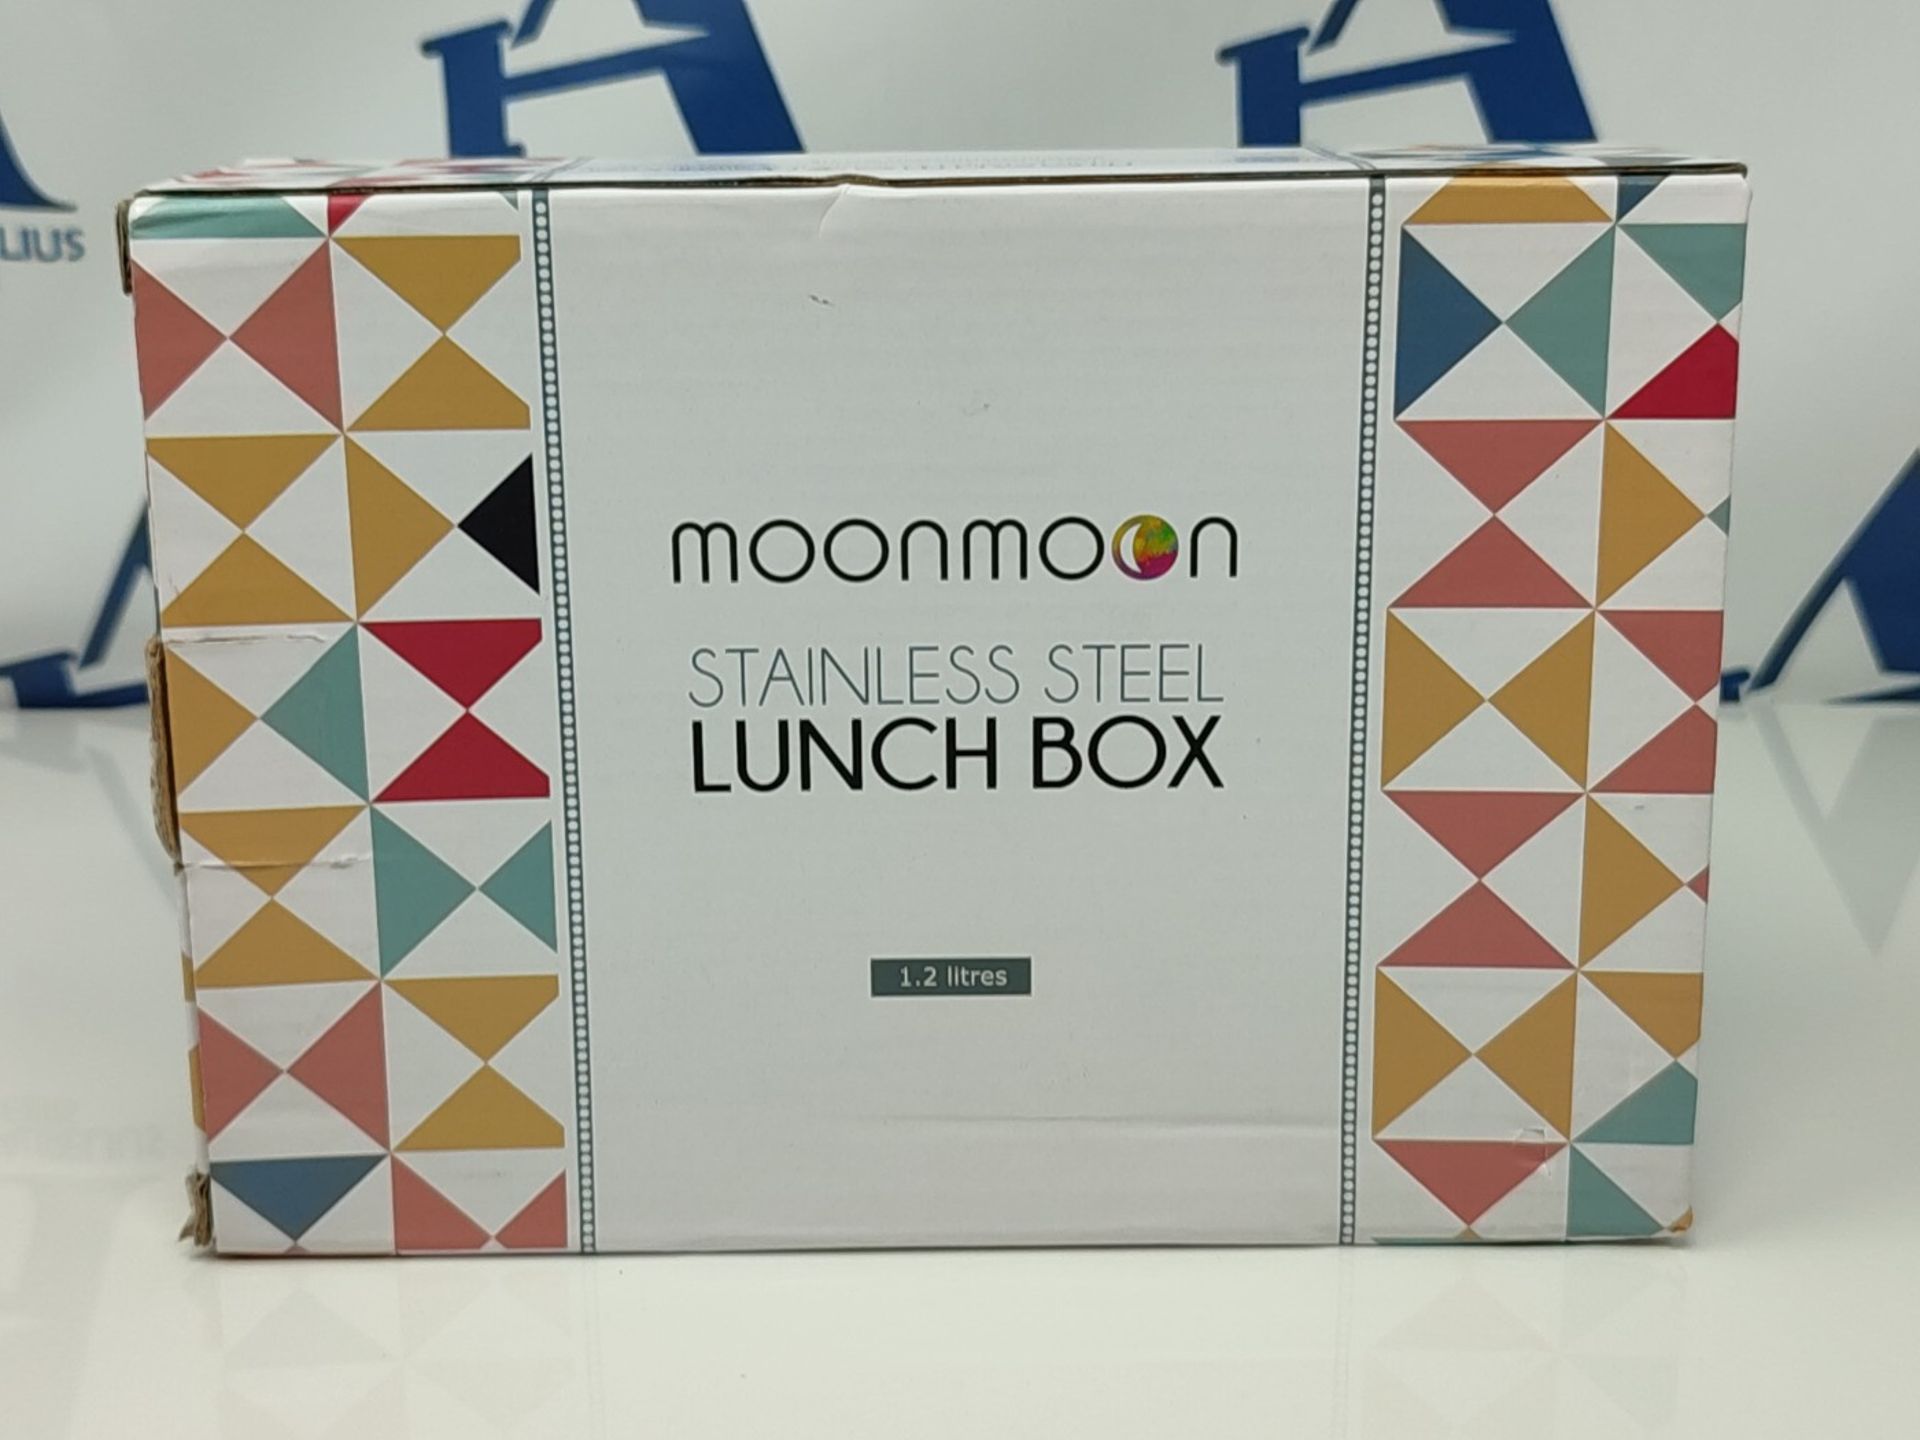 Moonmoon Stainless Steel Lunch Box | Eco-Friendly 1.2 Litre Leakproof Bento Box with c - Image 12 of 12